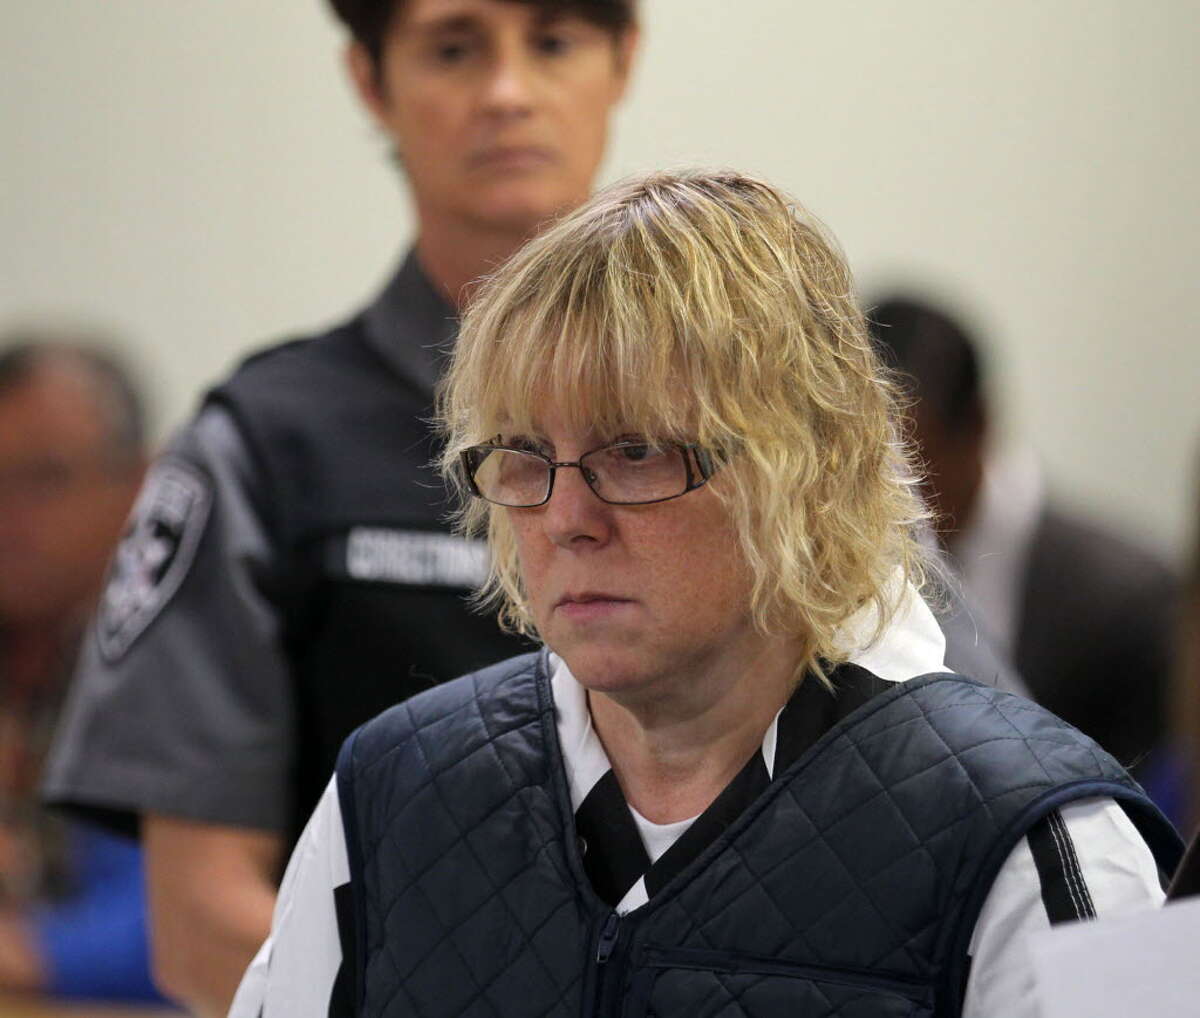 In this June 15, 2015, file photo, Joyce Mitchell appears before Judge Mark Rogers in Plattsburgh (N.Y.) City Court for a hearing. She is charged with helping Richard Matt and David Sweat escape from the Clinton Correctional Facility on June 6. While Richard Matt and David Sweat counted their final hours to freedom, prison tailor-shop instructor Mitchell was heading to a hospital with chest pains driven by a panic attack. She was leaving the hospital when she learned that Matt and Sweat were on the loose and that state police were looking for her and her husband, Lyle, a fellow industrial instructor at the prison. (G.N. Miller/NY Post via AP, Pool, File)